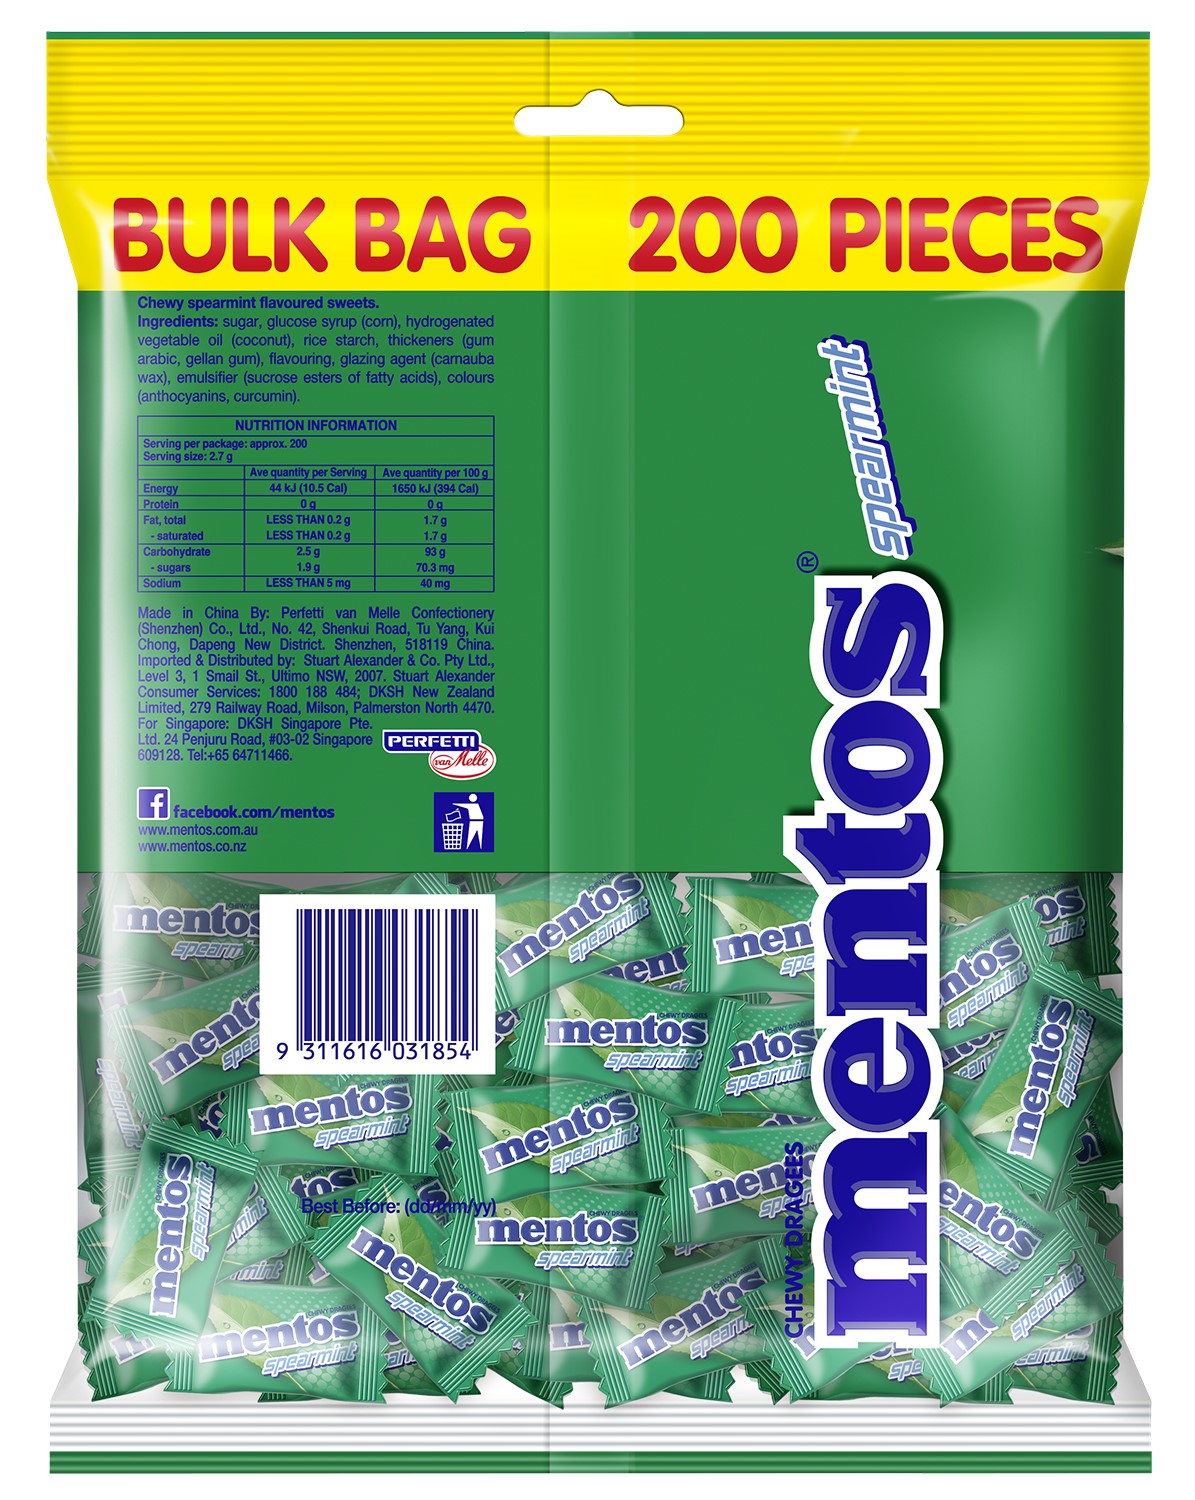 Mentos Spearmint Candy Pillowpack 540g (Box of 12)